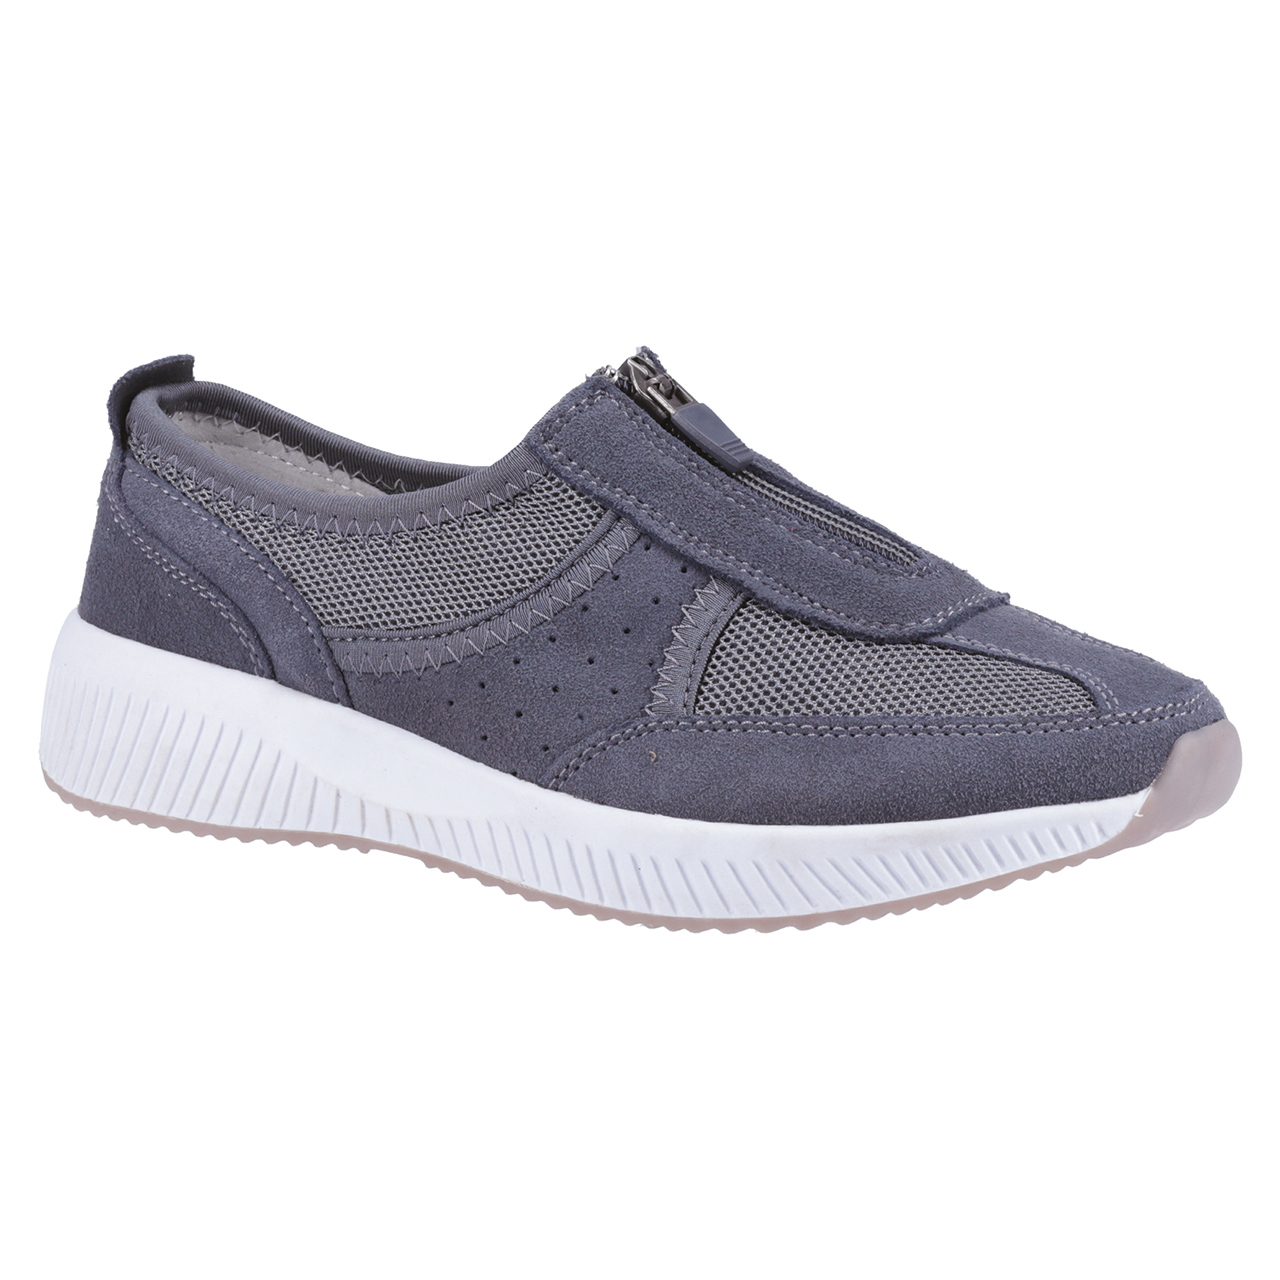 Cora Extra Wide Ladies? Leisure Shoes